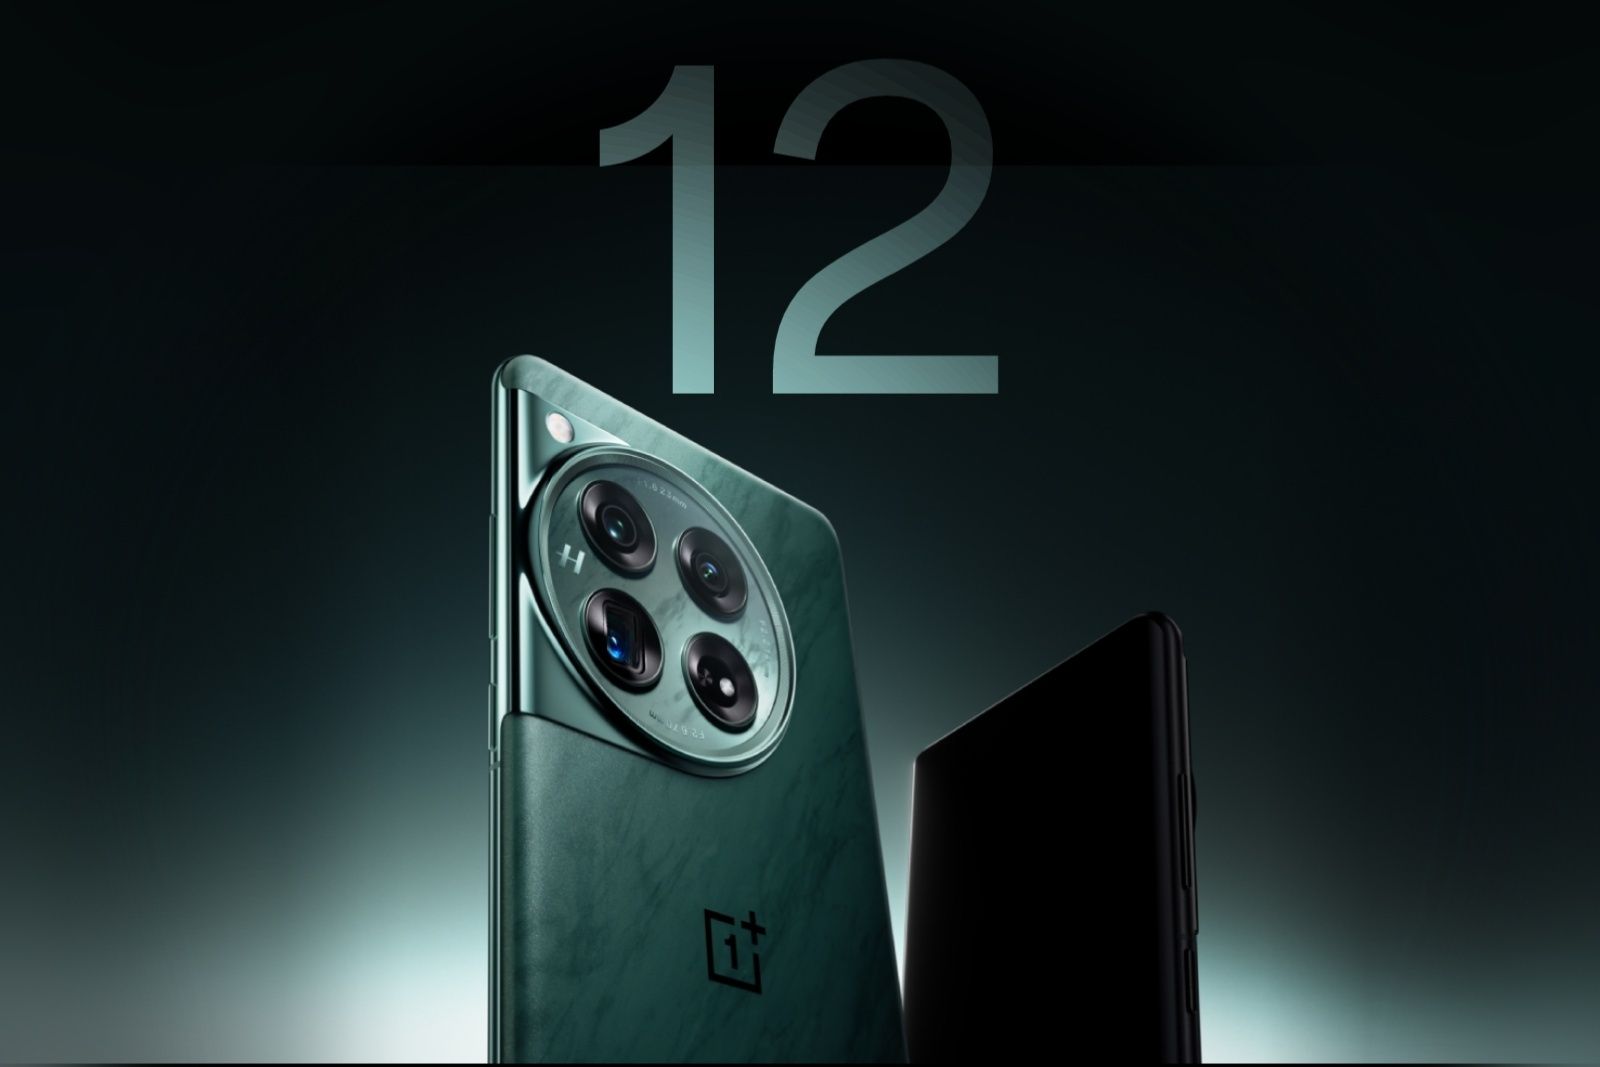 OnePlus 12 global launch confirmed for January 23, including the OnePlus 12R  - Gizmochina